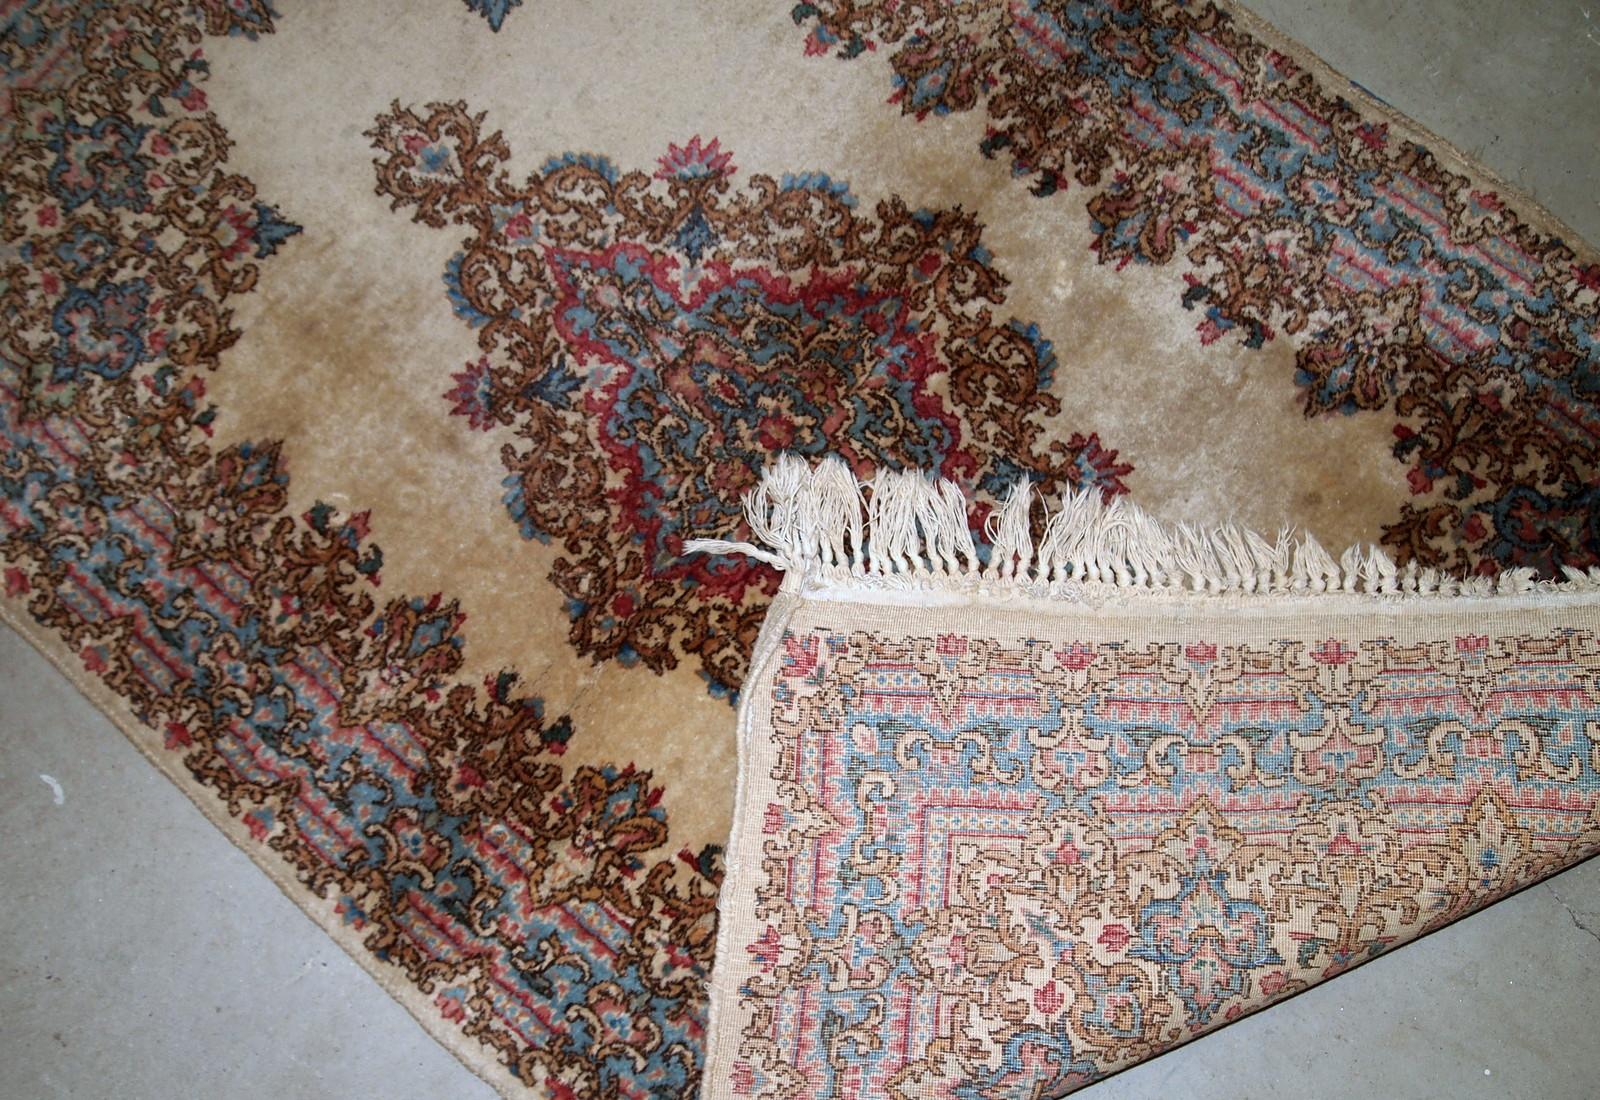 1930s style rugs